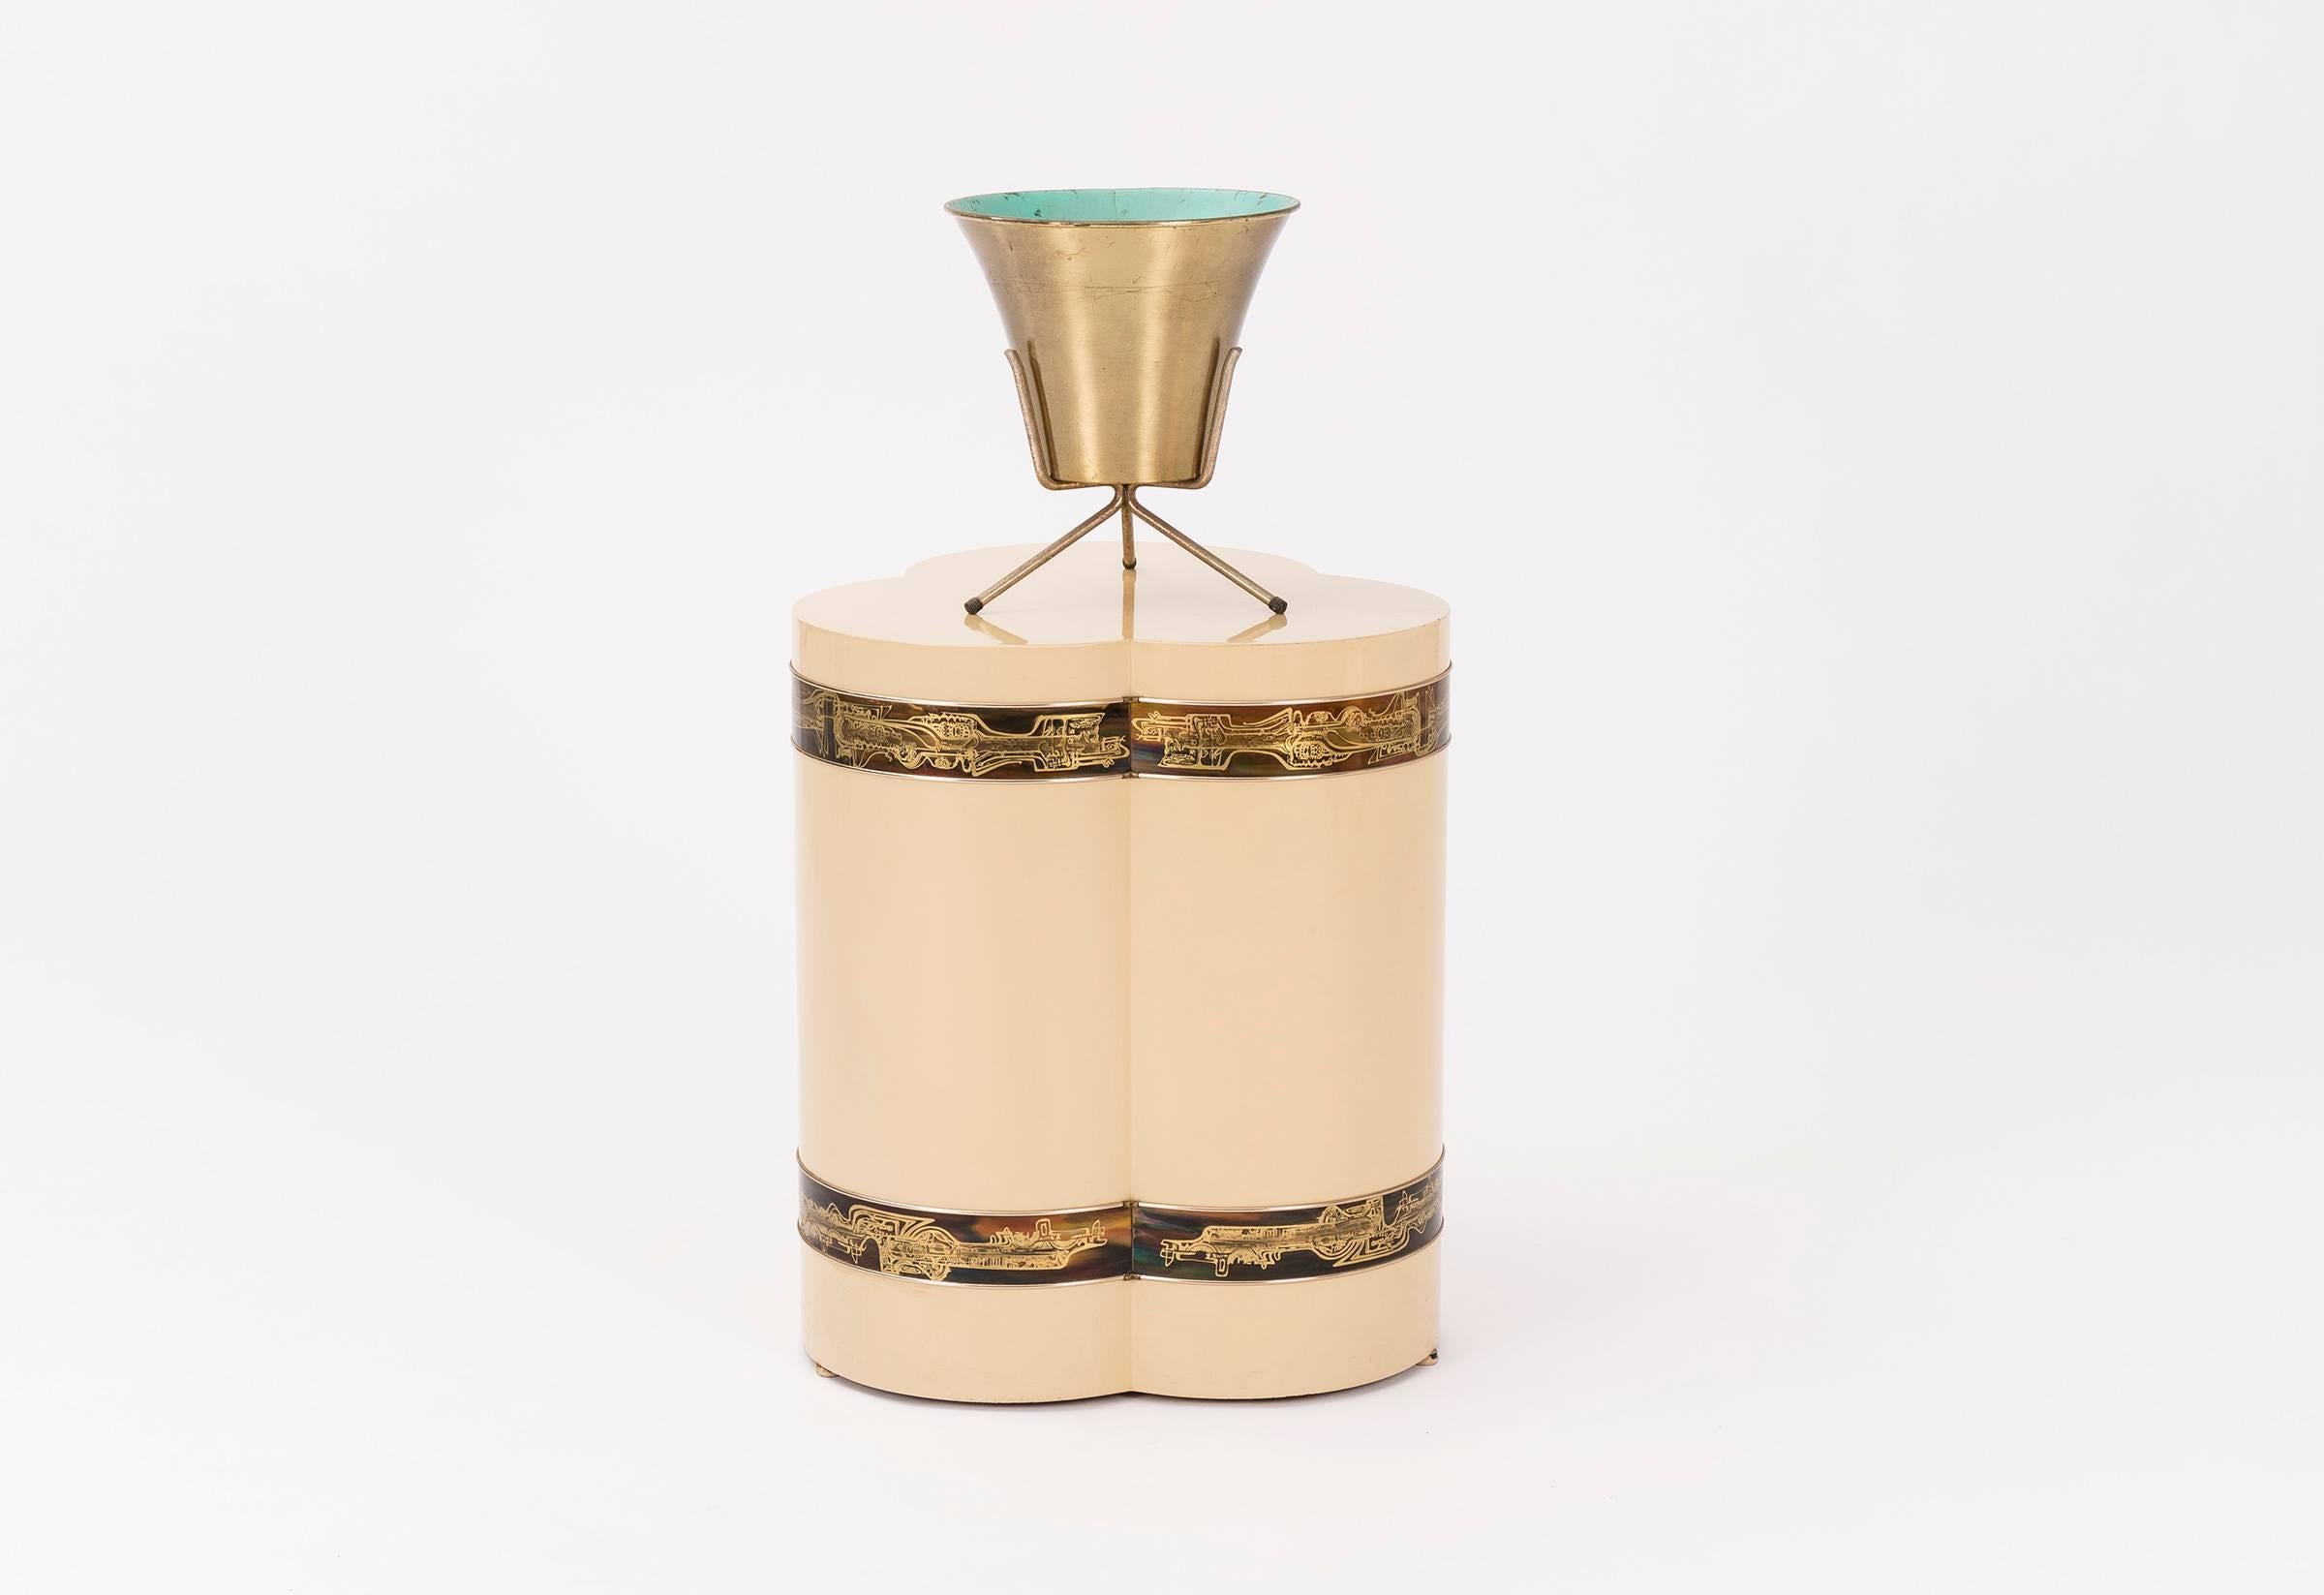 Bernhardt Rohde for Mastercraft. Lacquered wood clover form end table with acid etched brass design details.